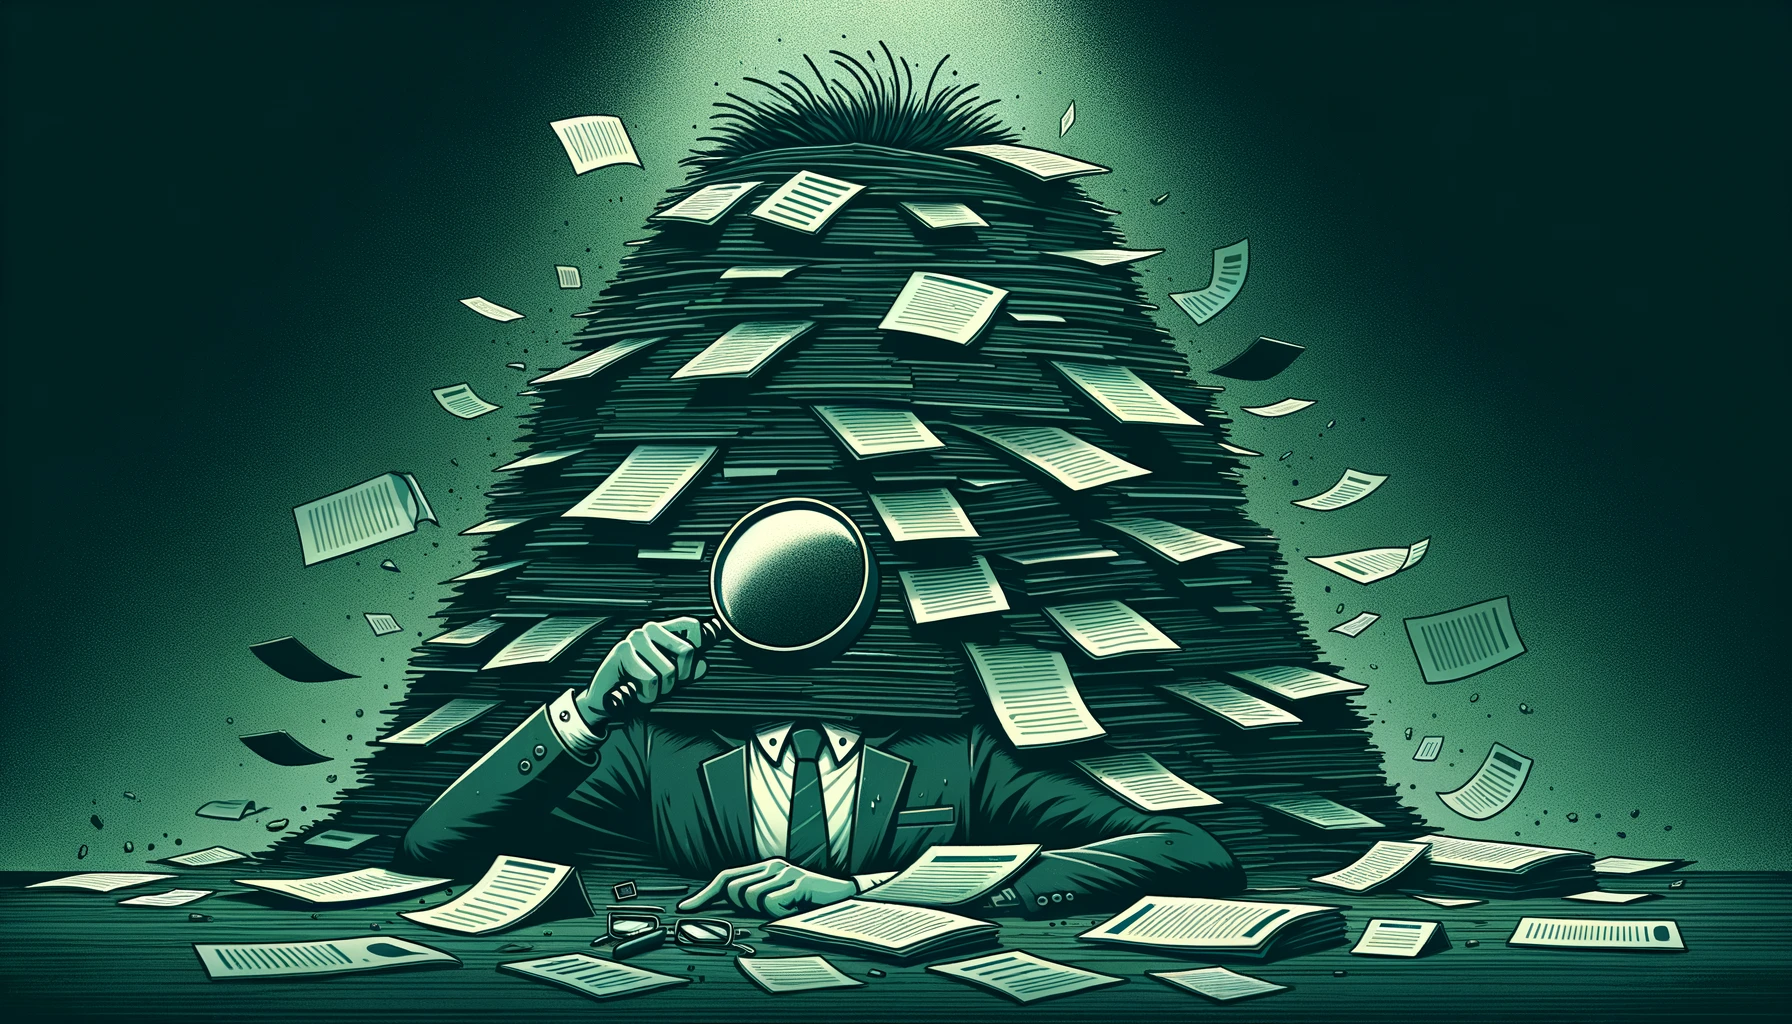 Online MBA Cost Comparison - The professional, with hair standing on end, buried under a mountain of pamphlets, with only a hand sticking out holding a magnifying glass.